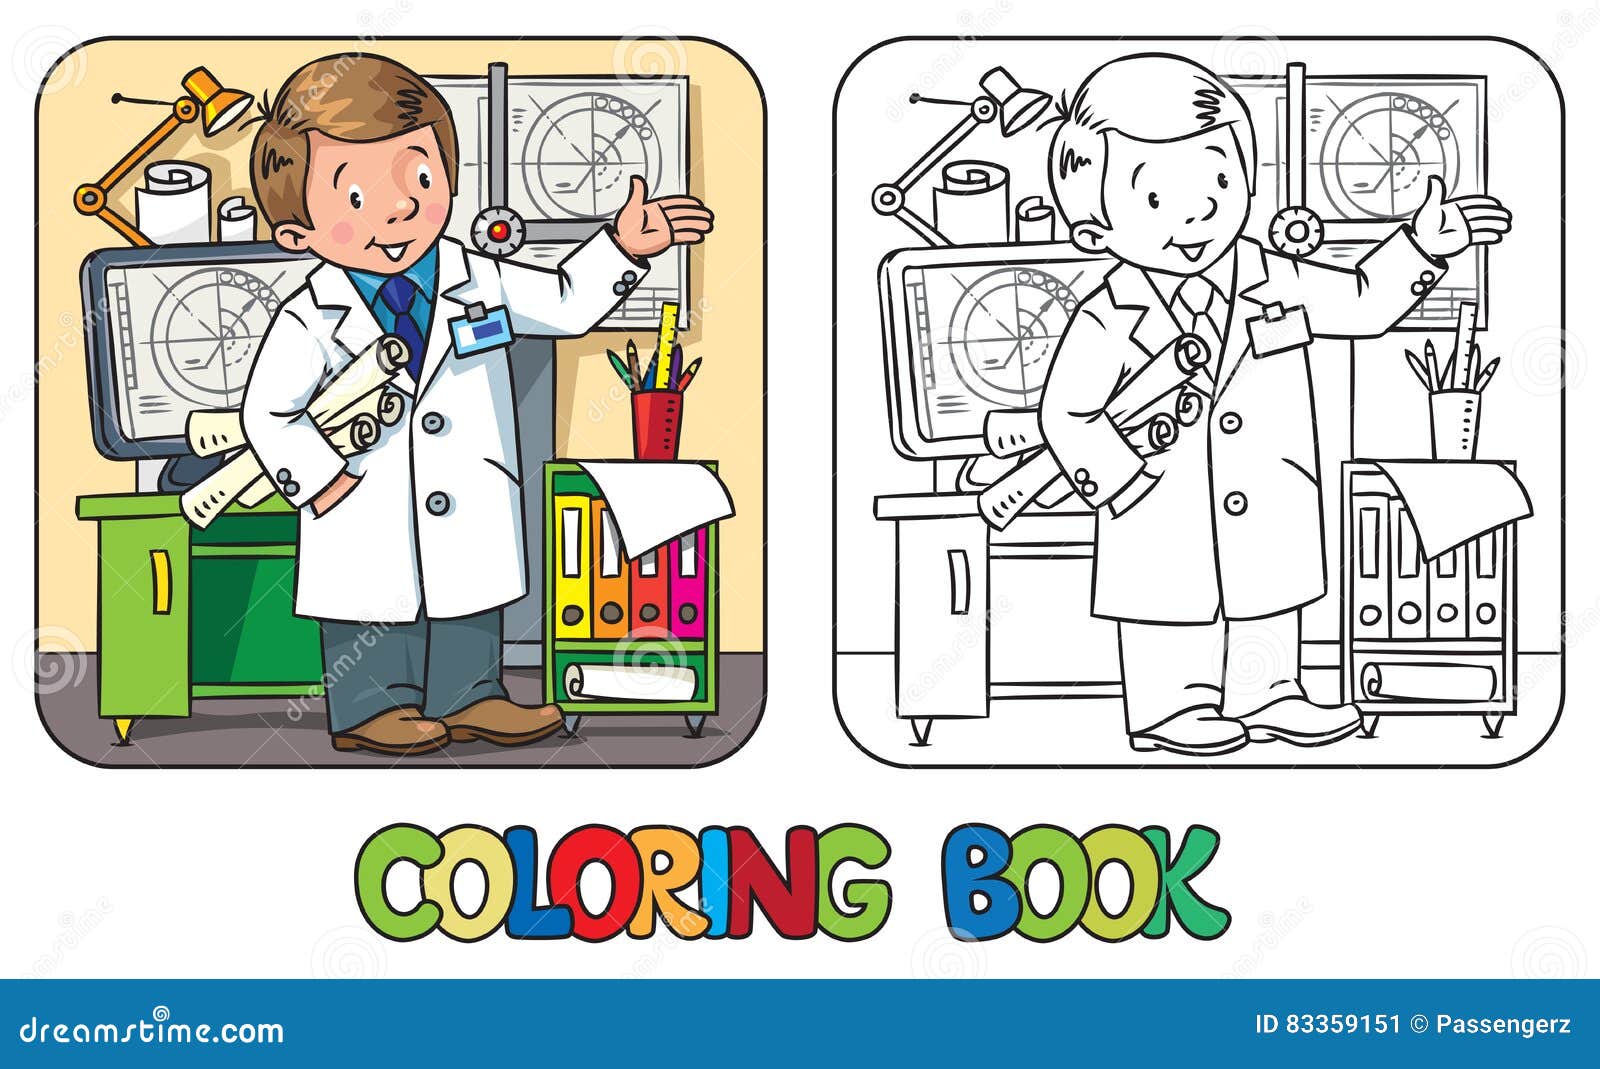 engineer coloring book. profession abc series